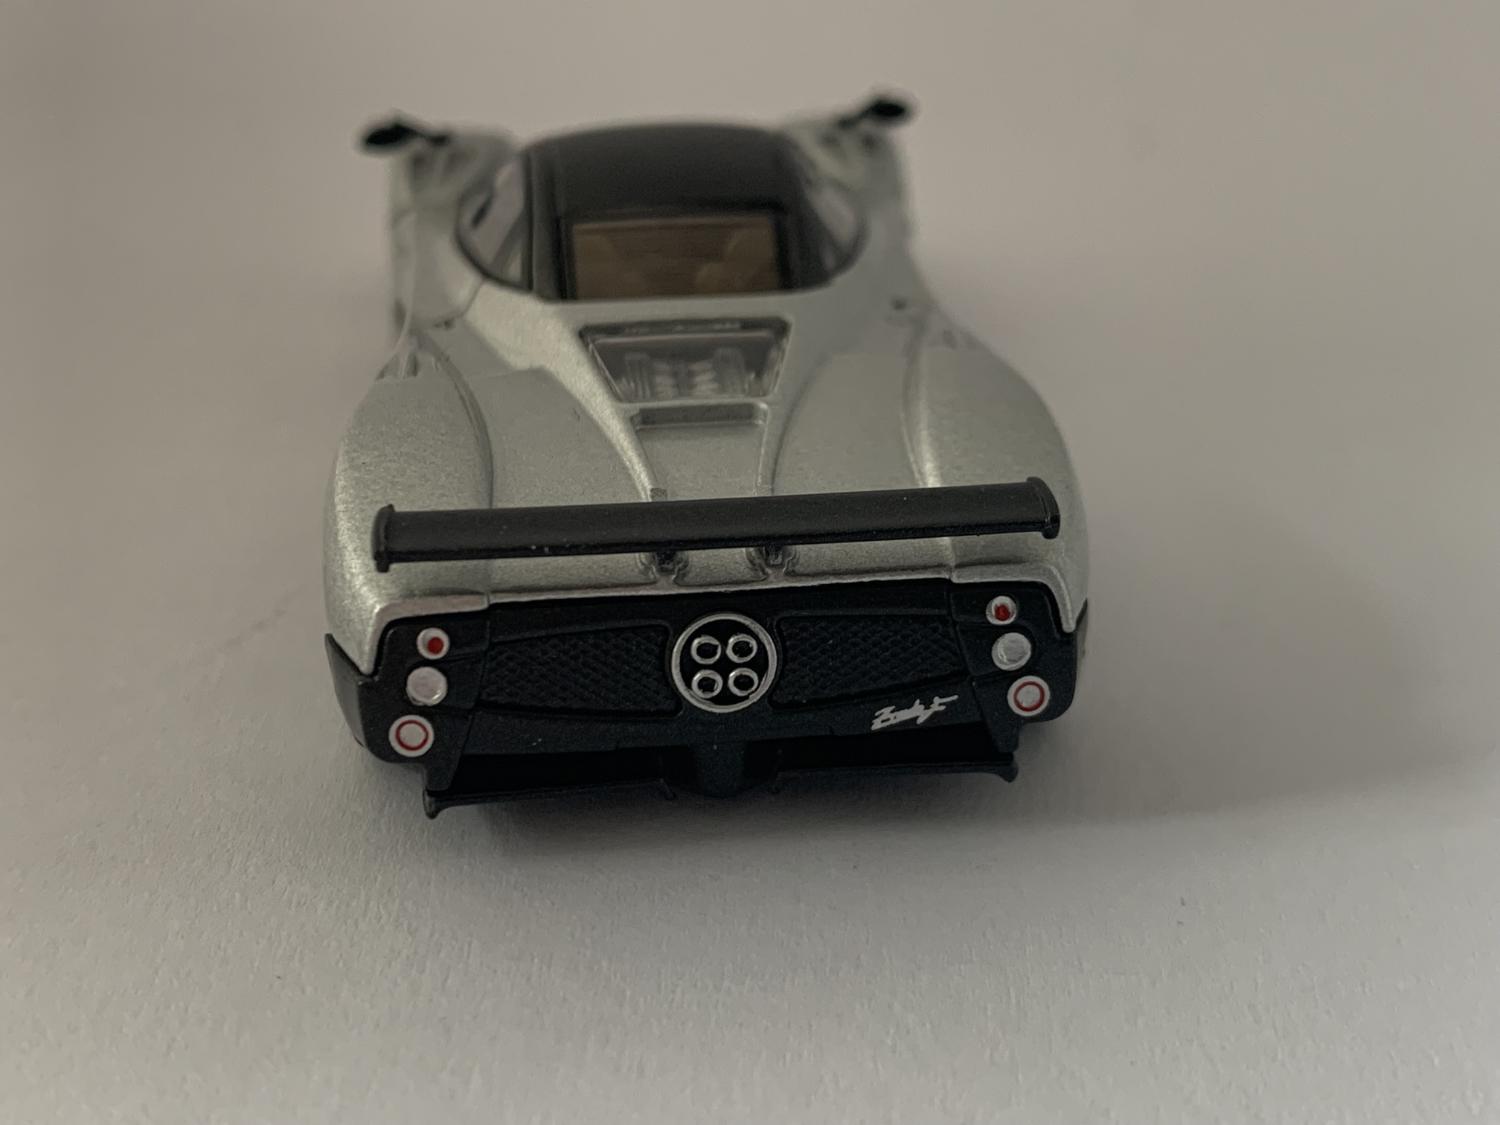 An excellent scale model of a Pagani Zonda F decorated in silver with high rear spoiler and silver wheels.